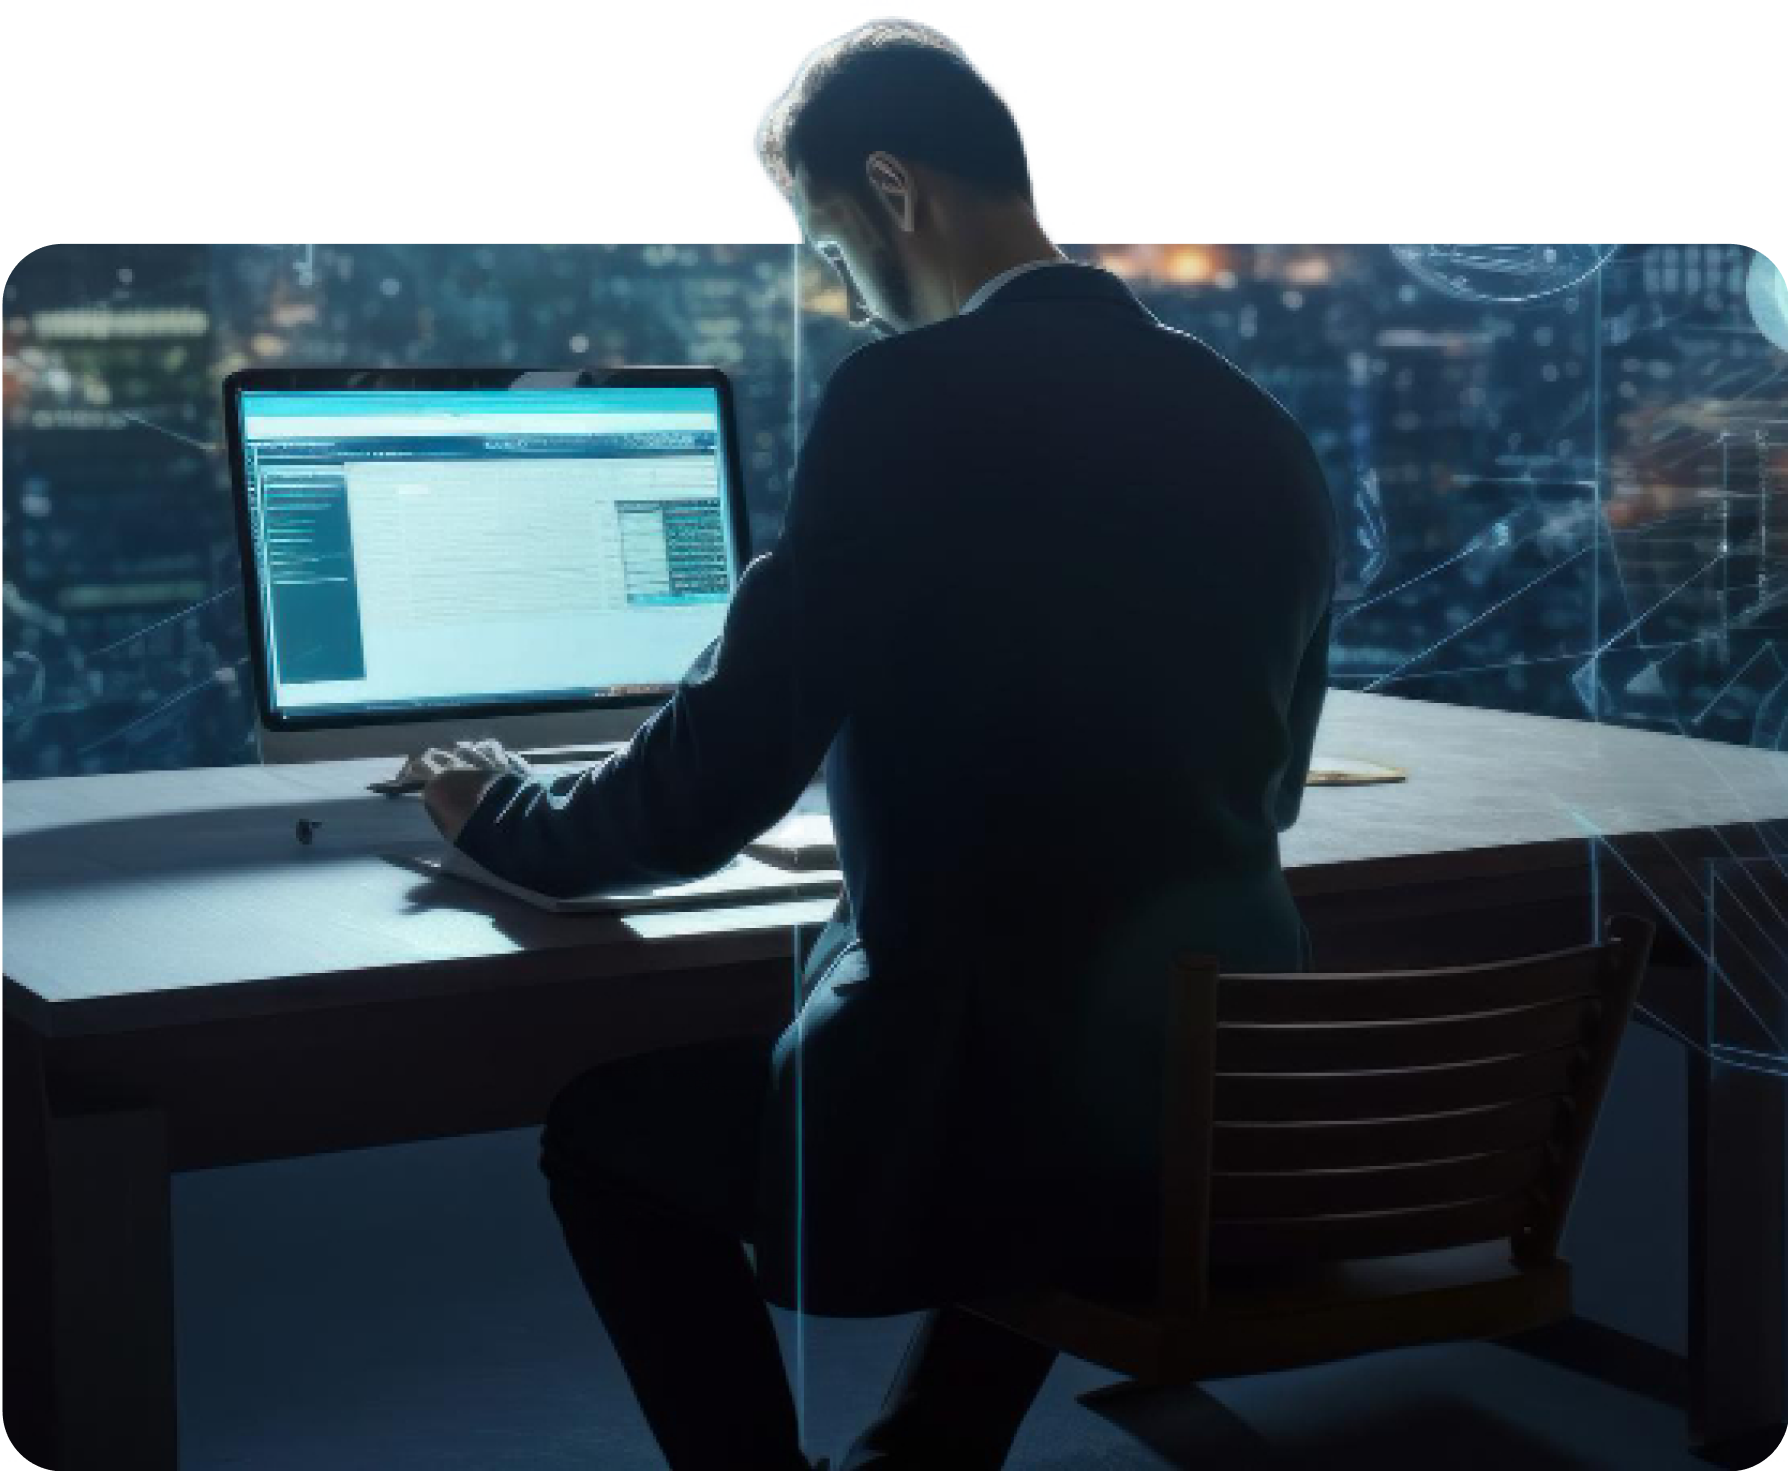 A man in a suit is sitting at a desk working on a computer.